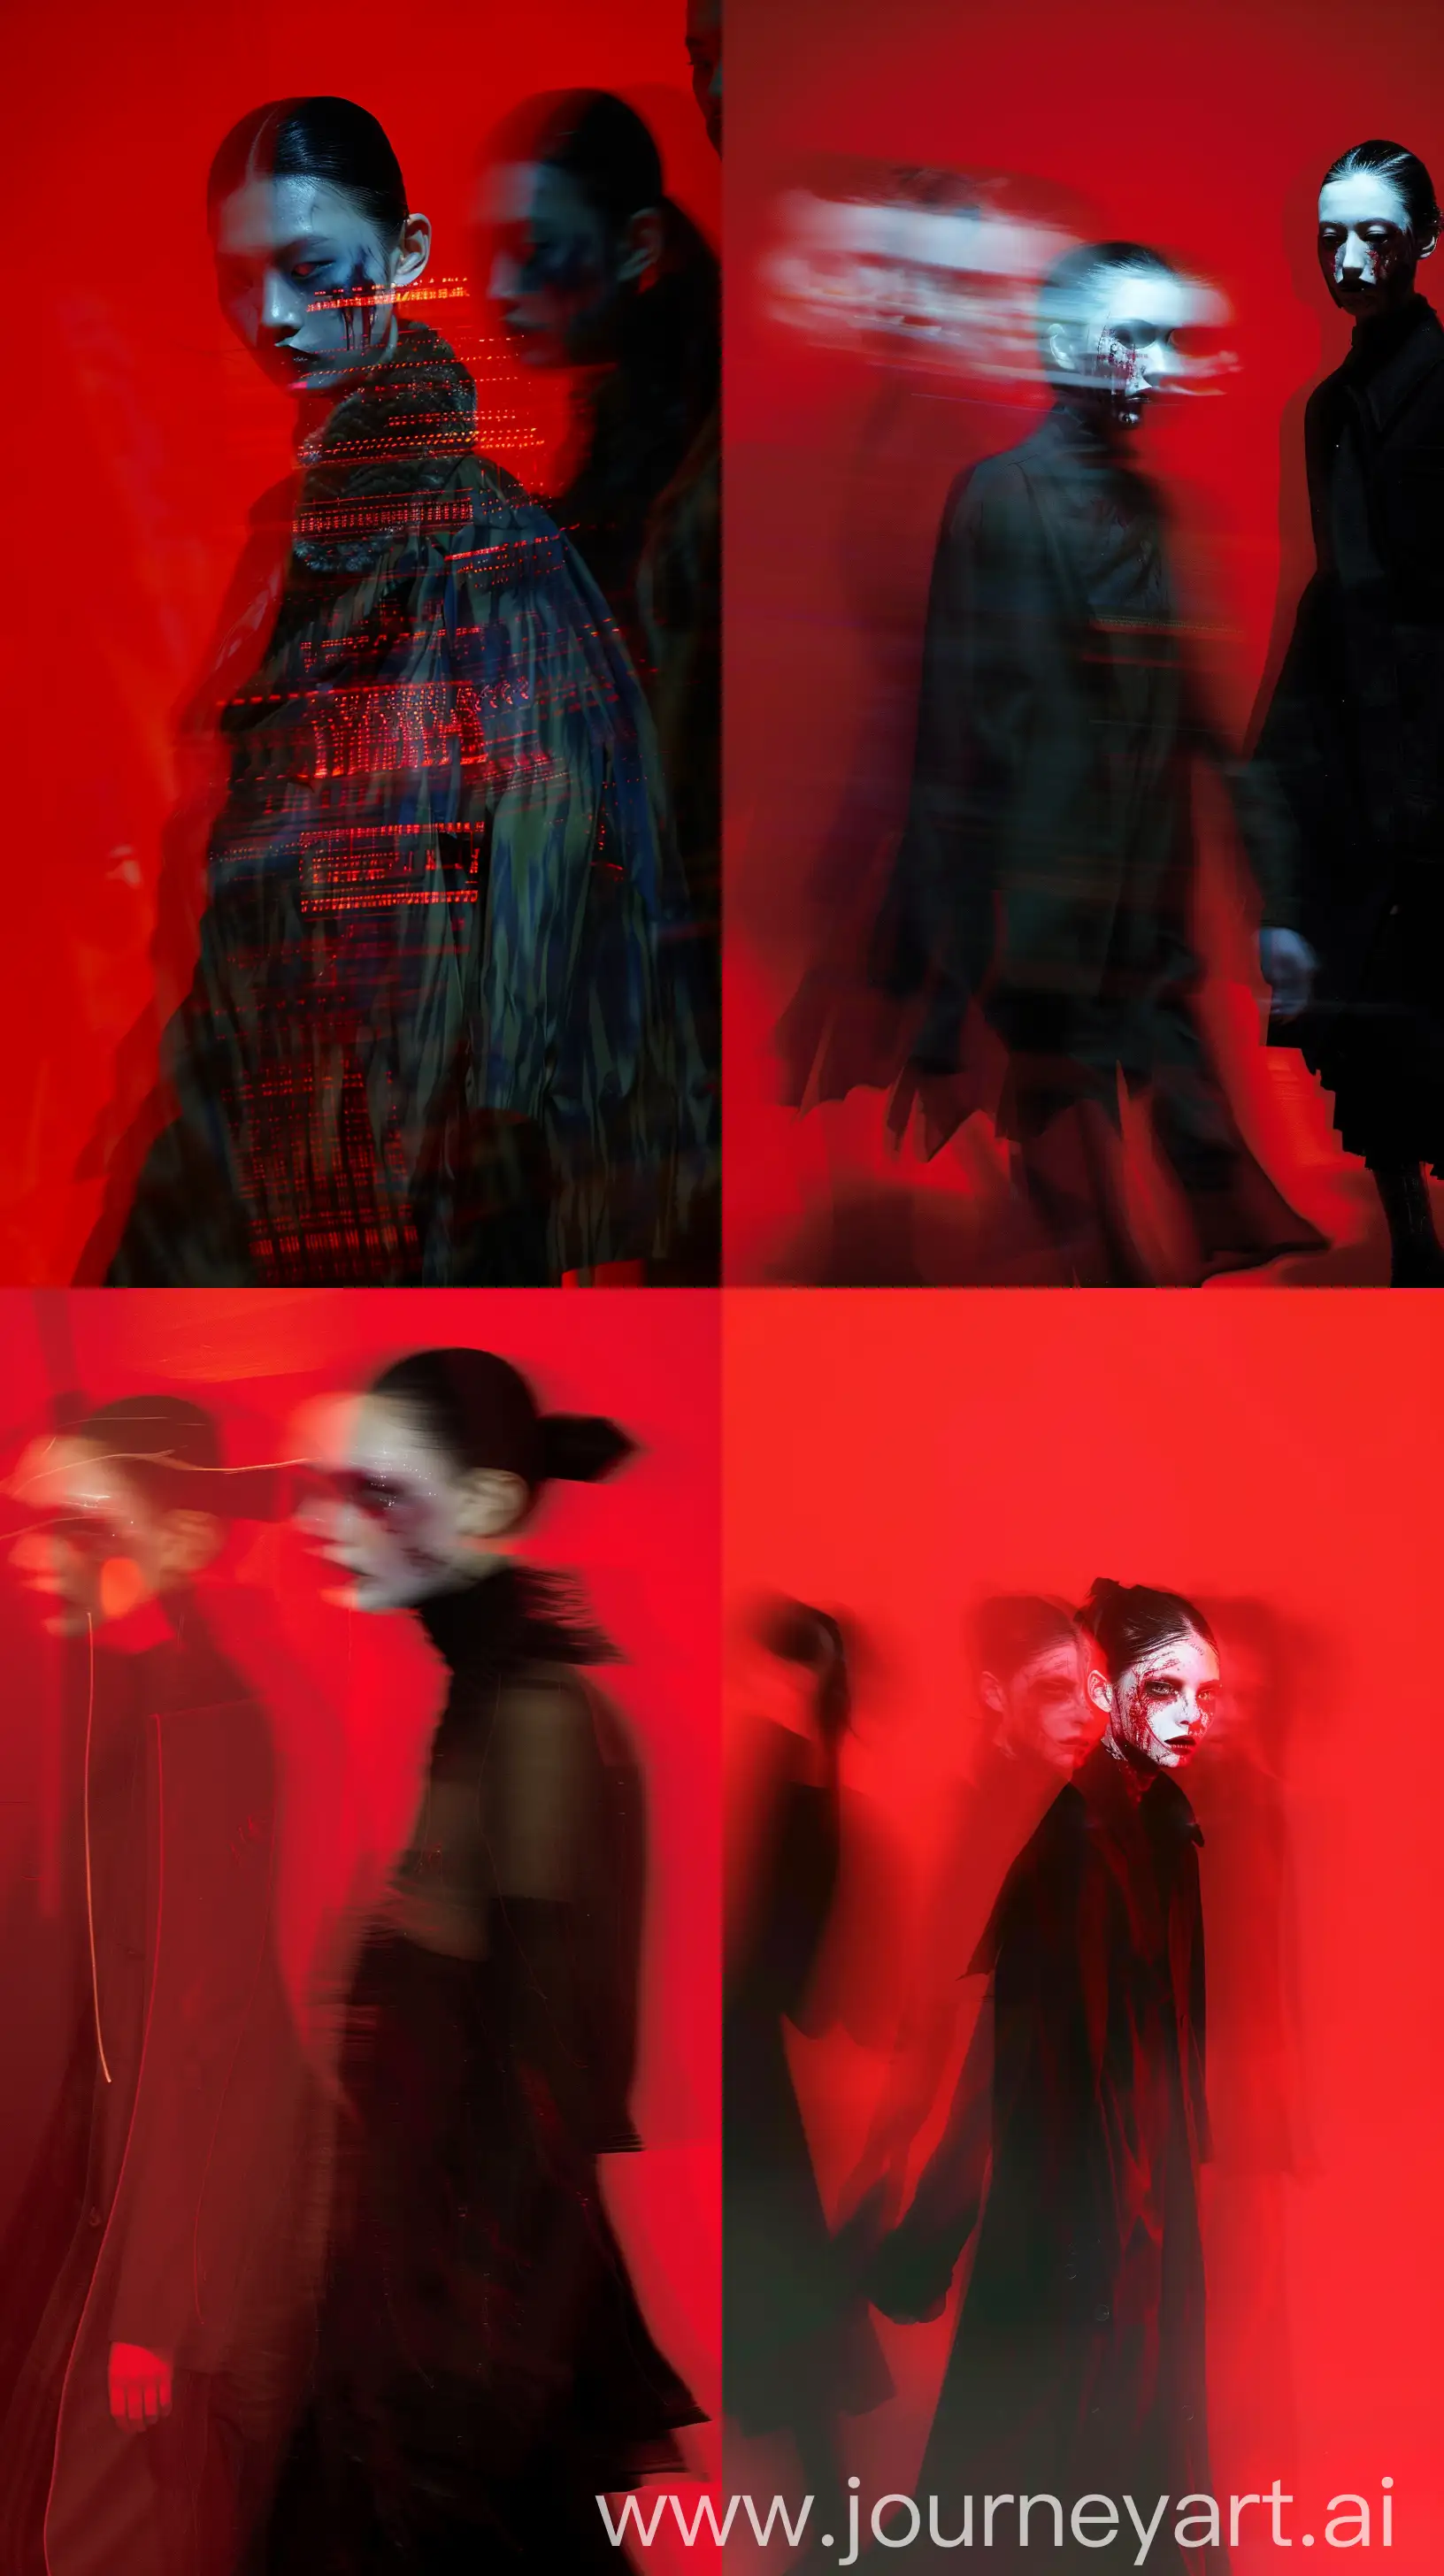 Create image image, blurred oriental balenciaga female models figures are depicted against a red background. wounded make up, The motion blur creates a ghostly, ethereal effect, with clothing details obscured. One figure in the foreground appears to be wearing a oversized horror high fashion blackout,  The lighting and blur lend a mysterious, almost haunting quality to the scene, nocturnal fashion scene --ar 9:16